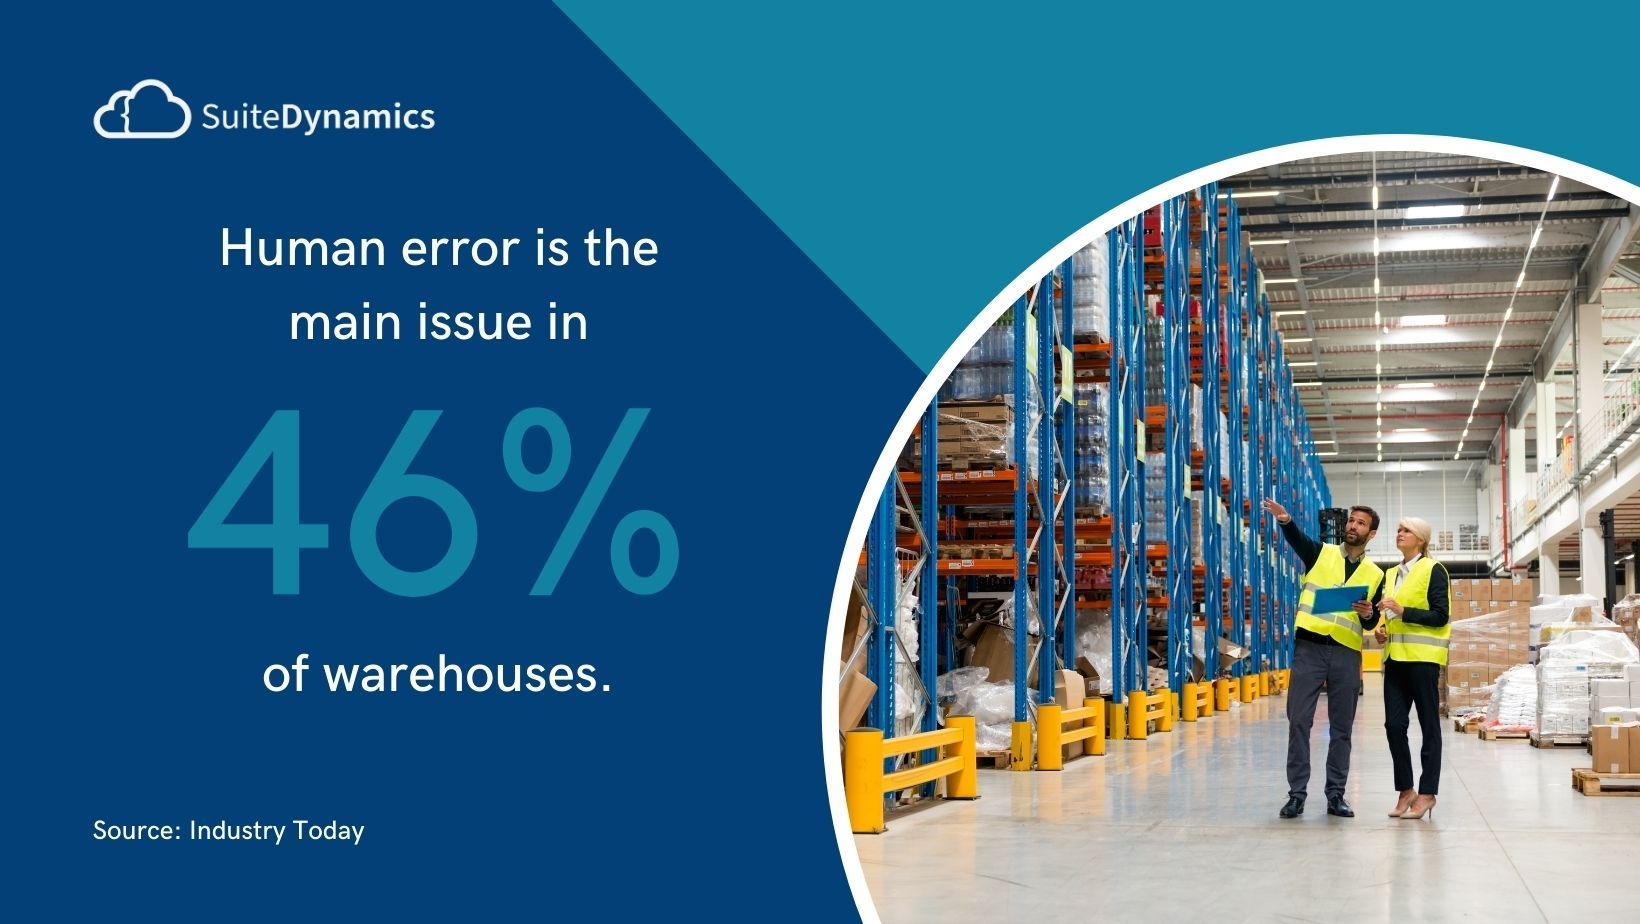 Graphic explaining that human error is the main issue in 46% of warehouses.